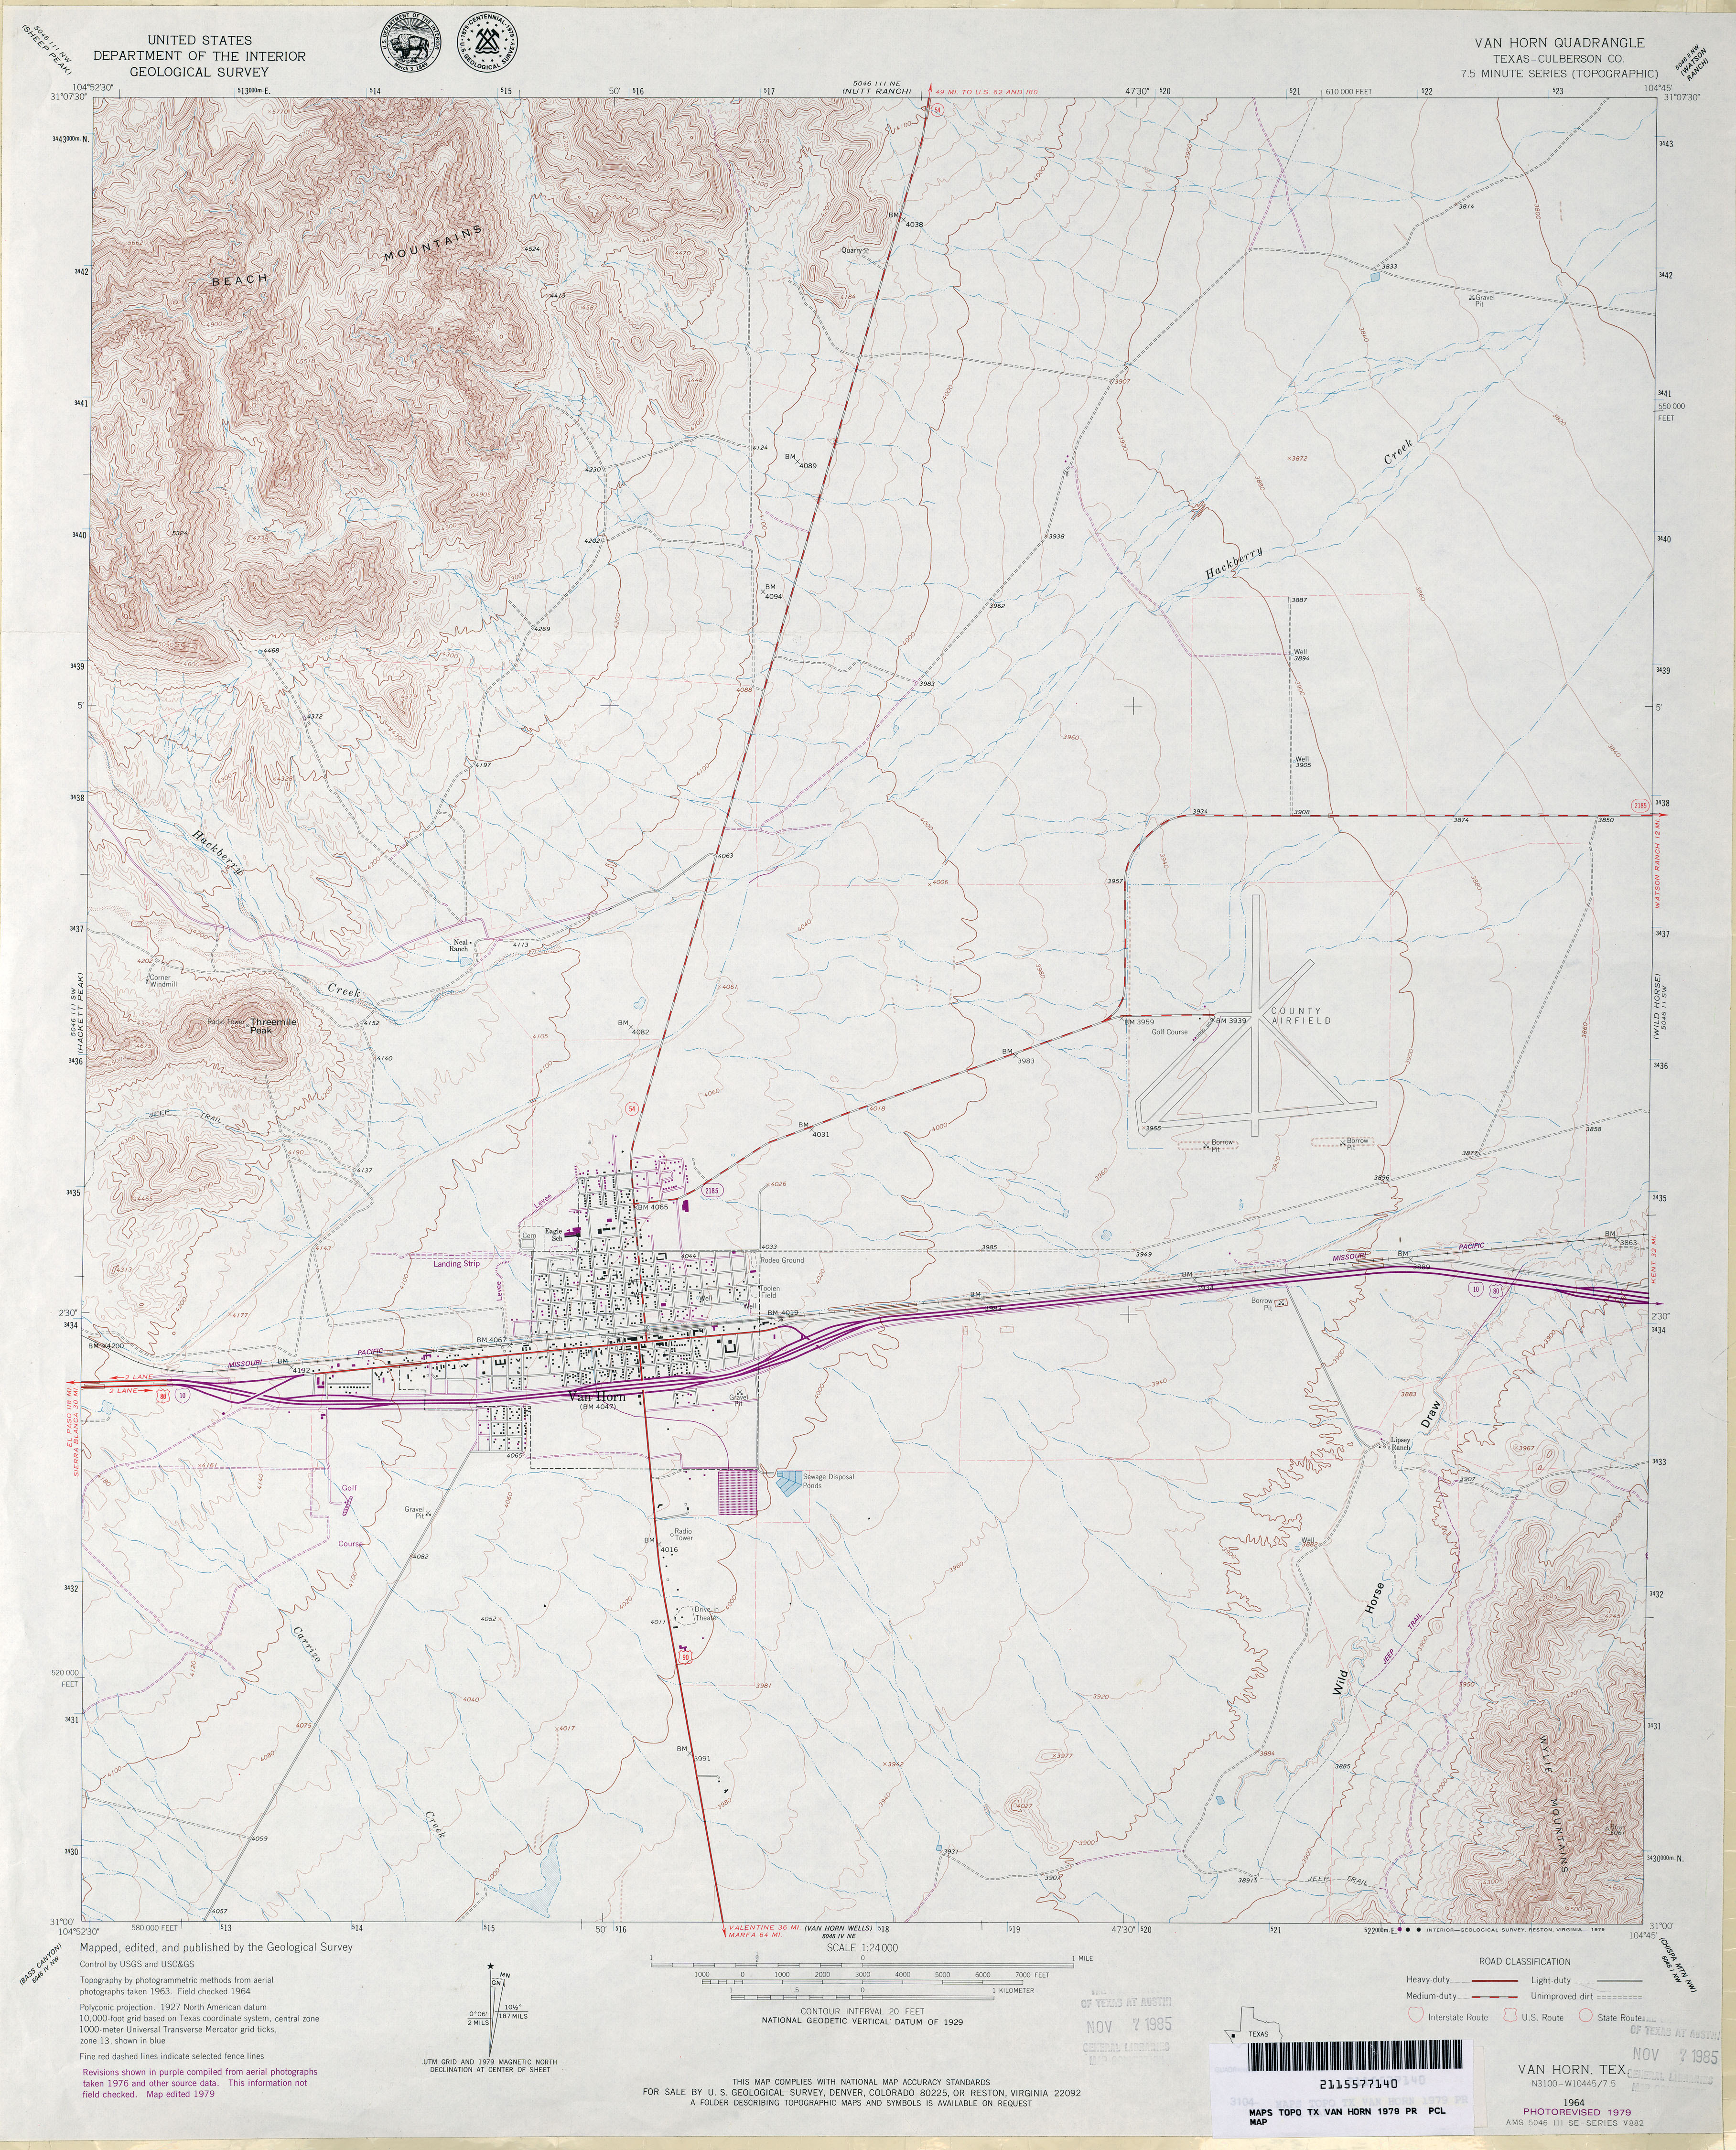 Texas Topographic Maps - Perry-Castañeda Map Collection - Ut Library - Van Horn Texas Map